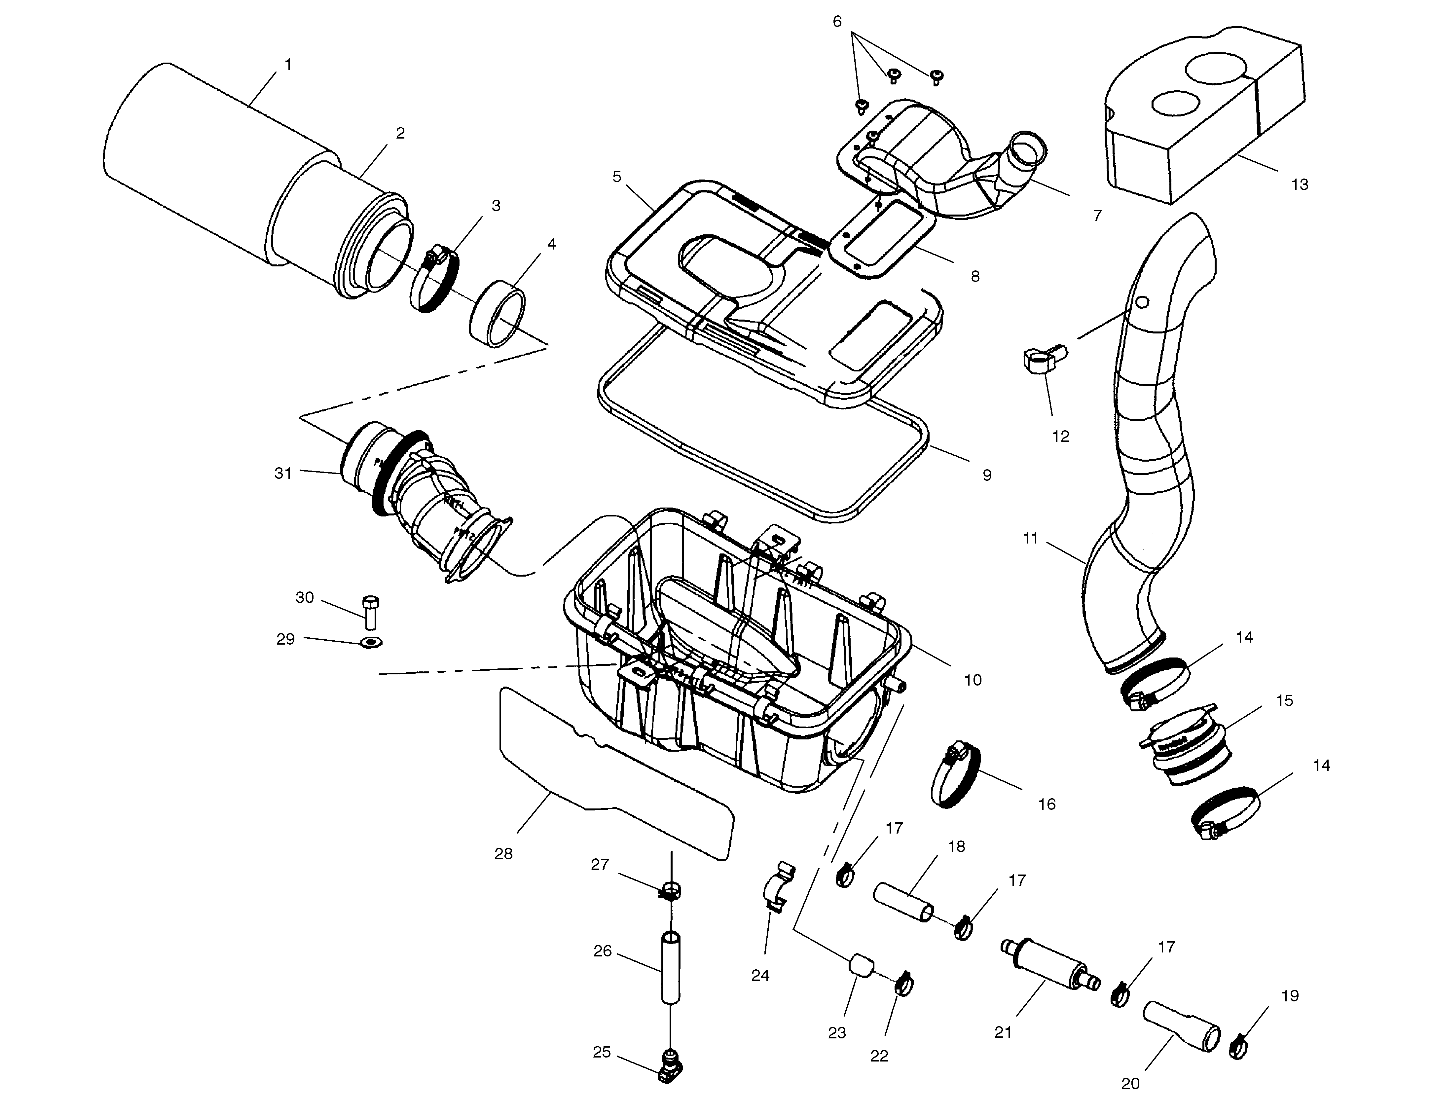 Part Number : 5433847 SLEEVE-CARB INNER